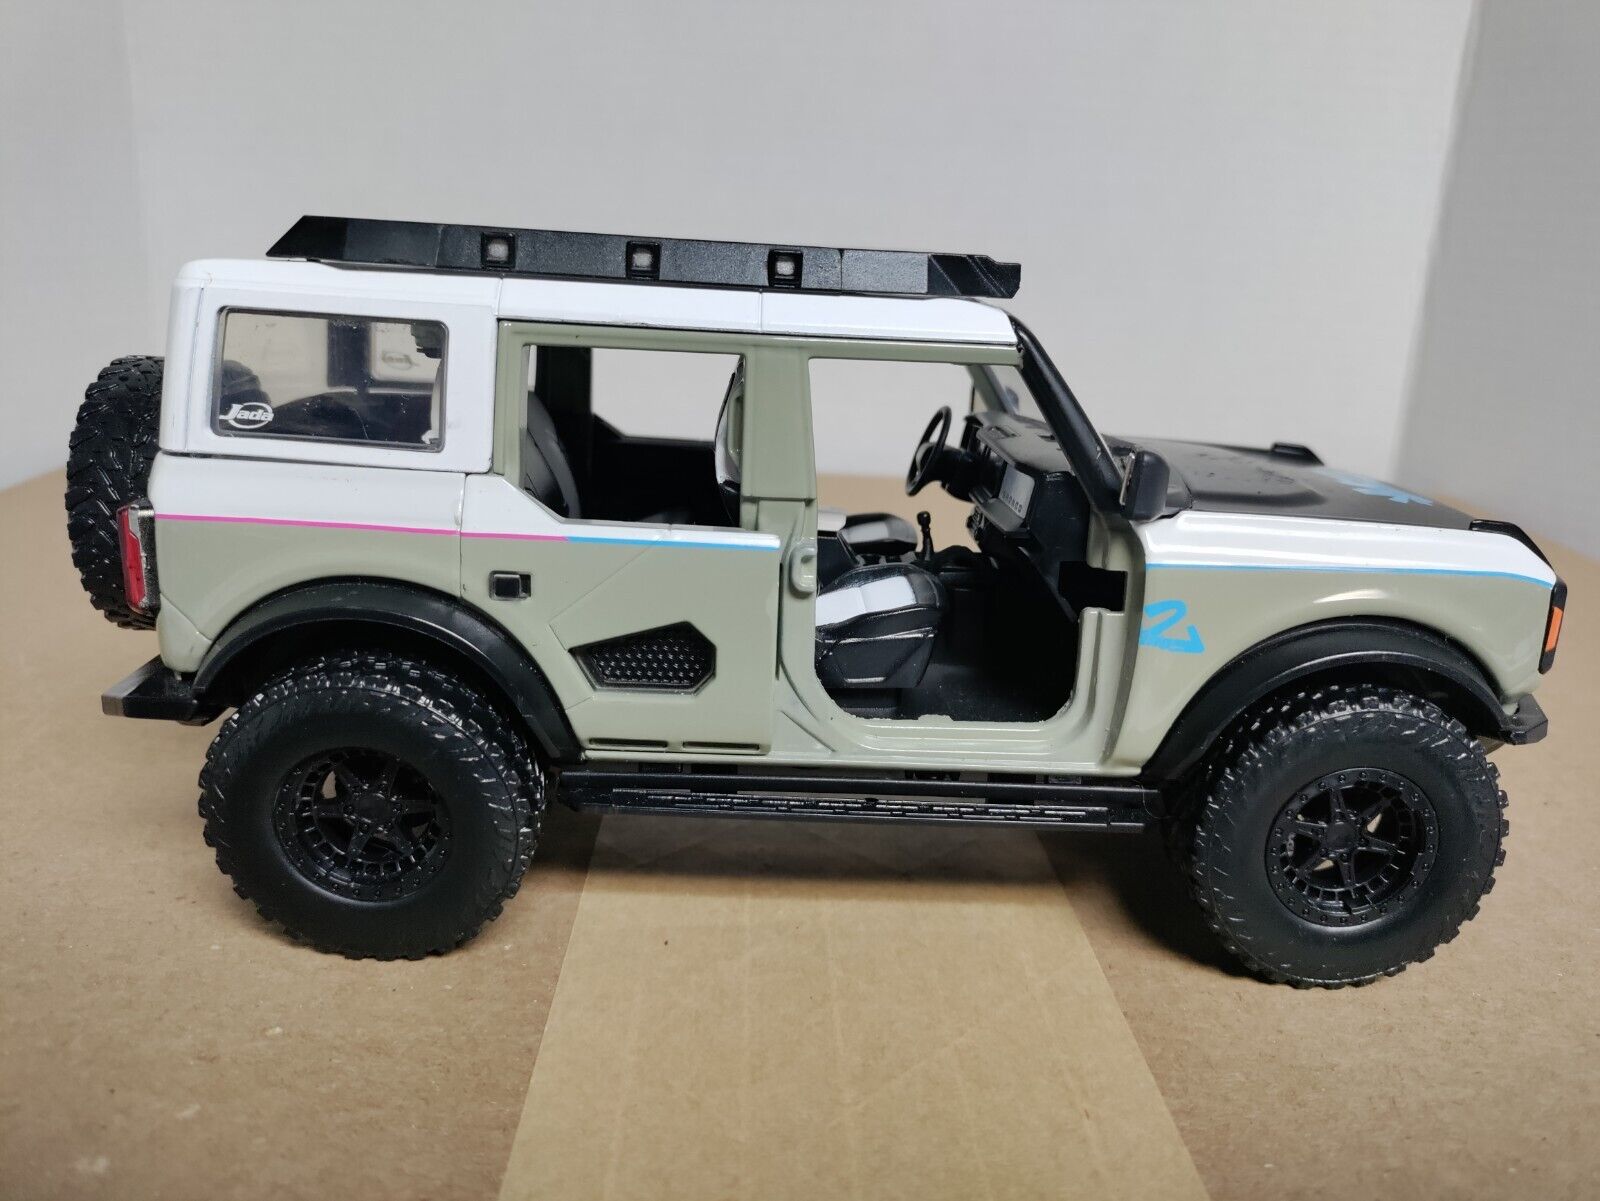 2021 Ford Bronco Gray and White with Matt Black Hood with Roof Rack \